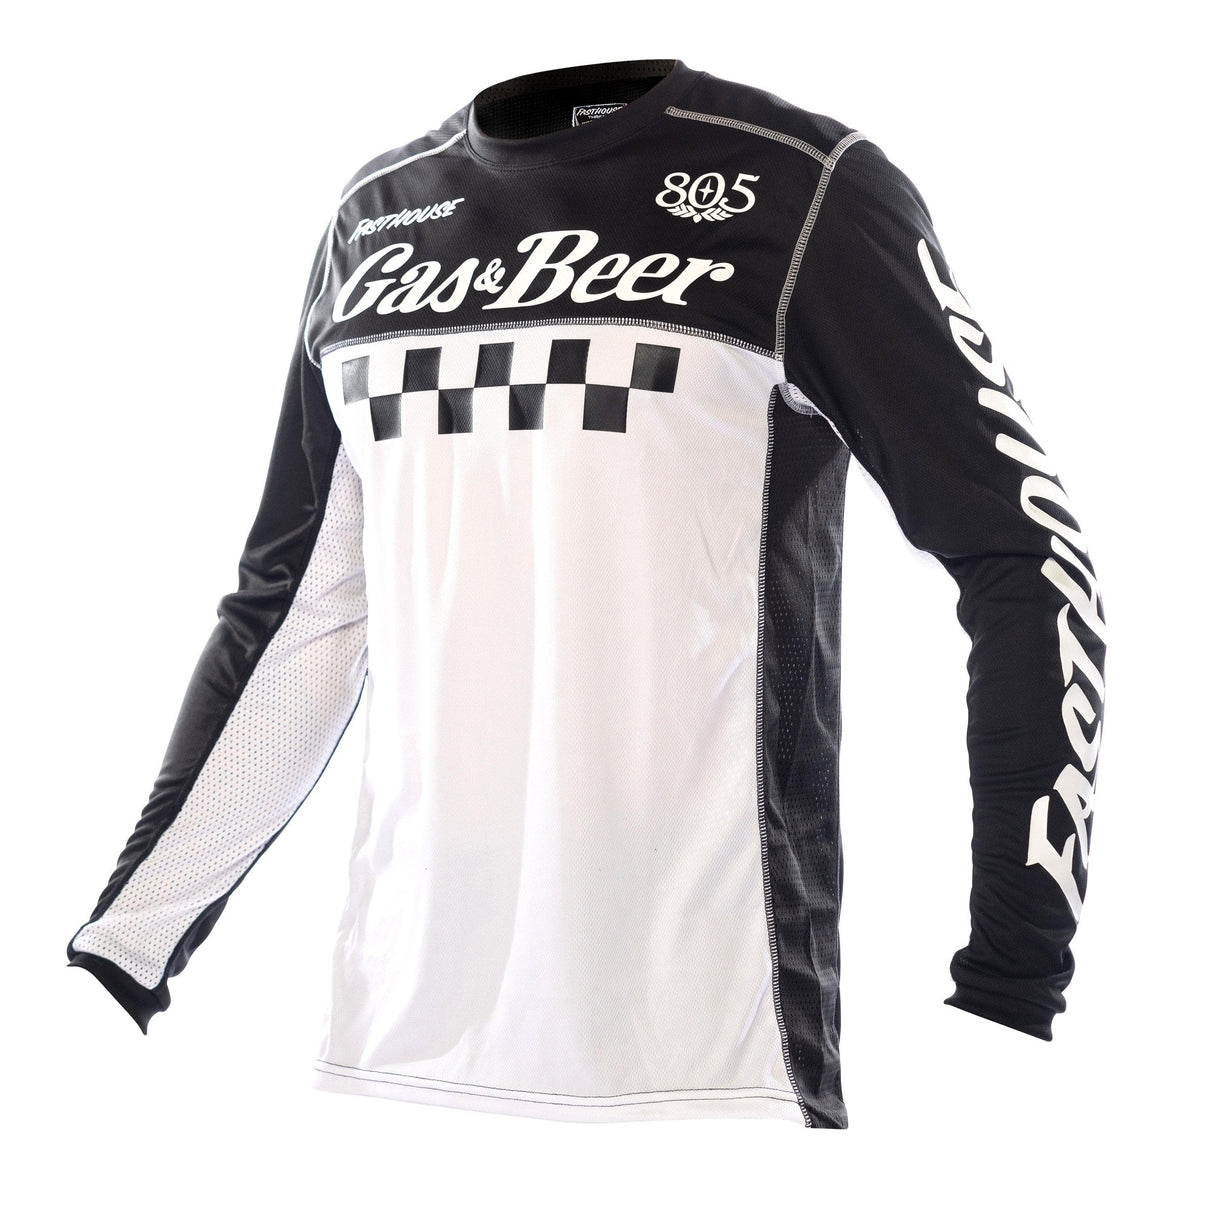 Fasthouse 805 Grindhouse Tavern Long Sleeve Jersey 2021: Black/White 3Xl